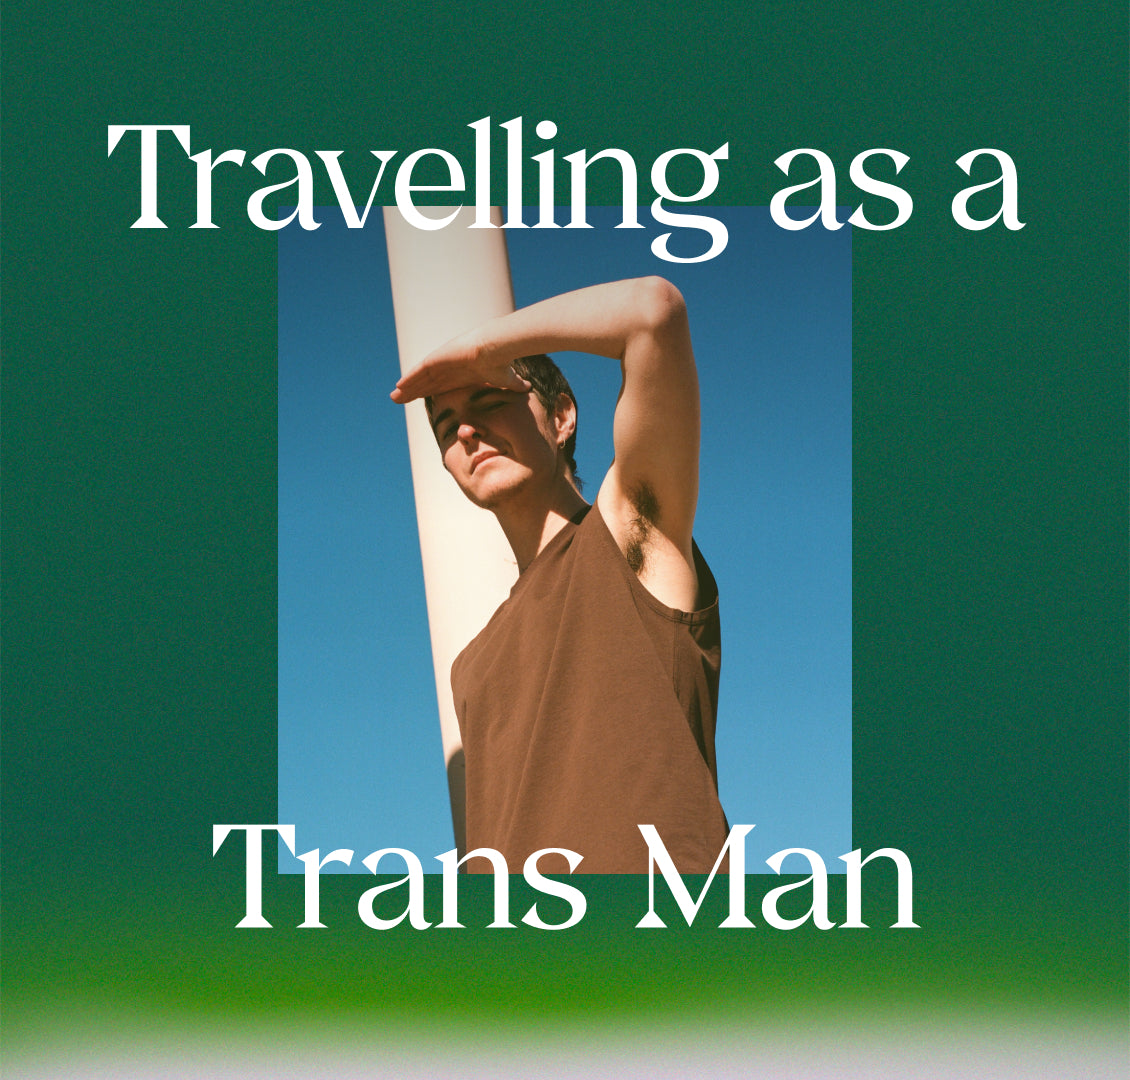 Traveling as a Trans Man